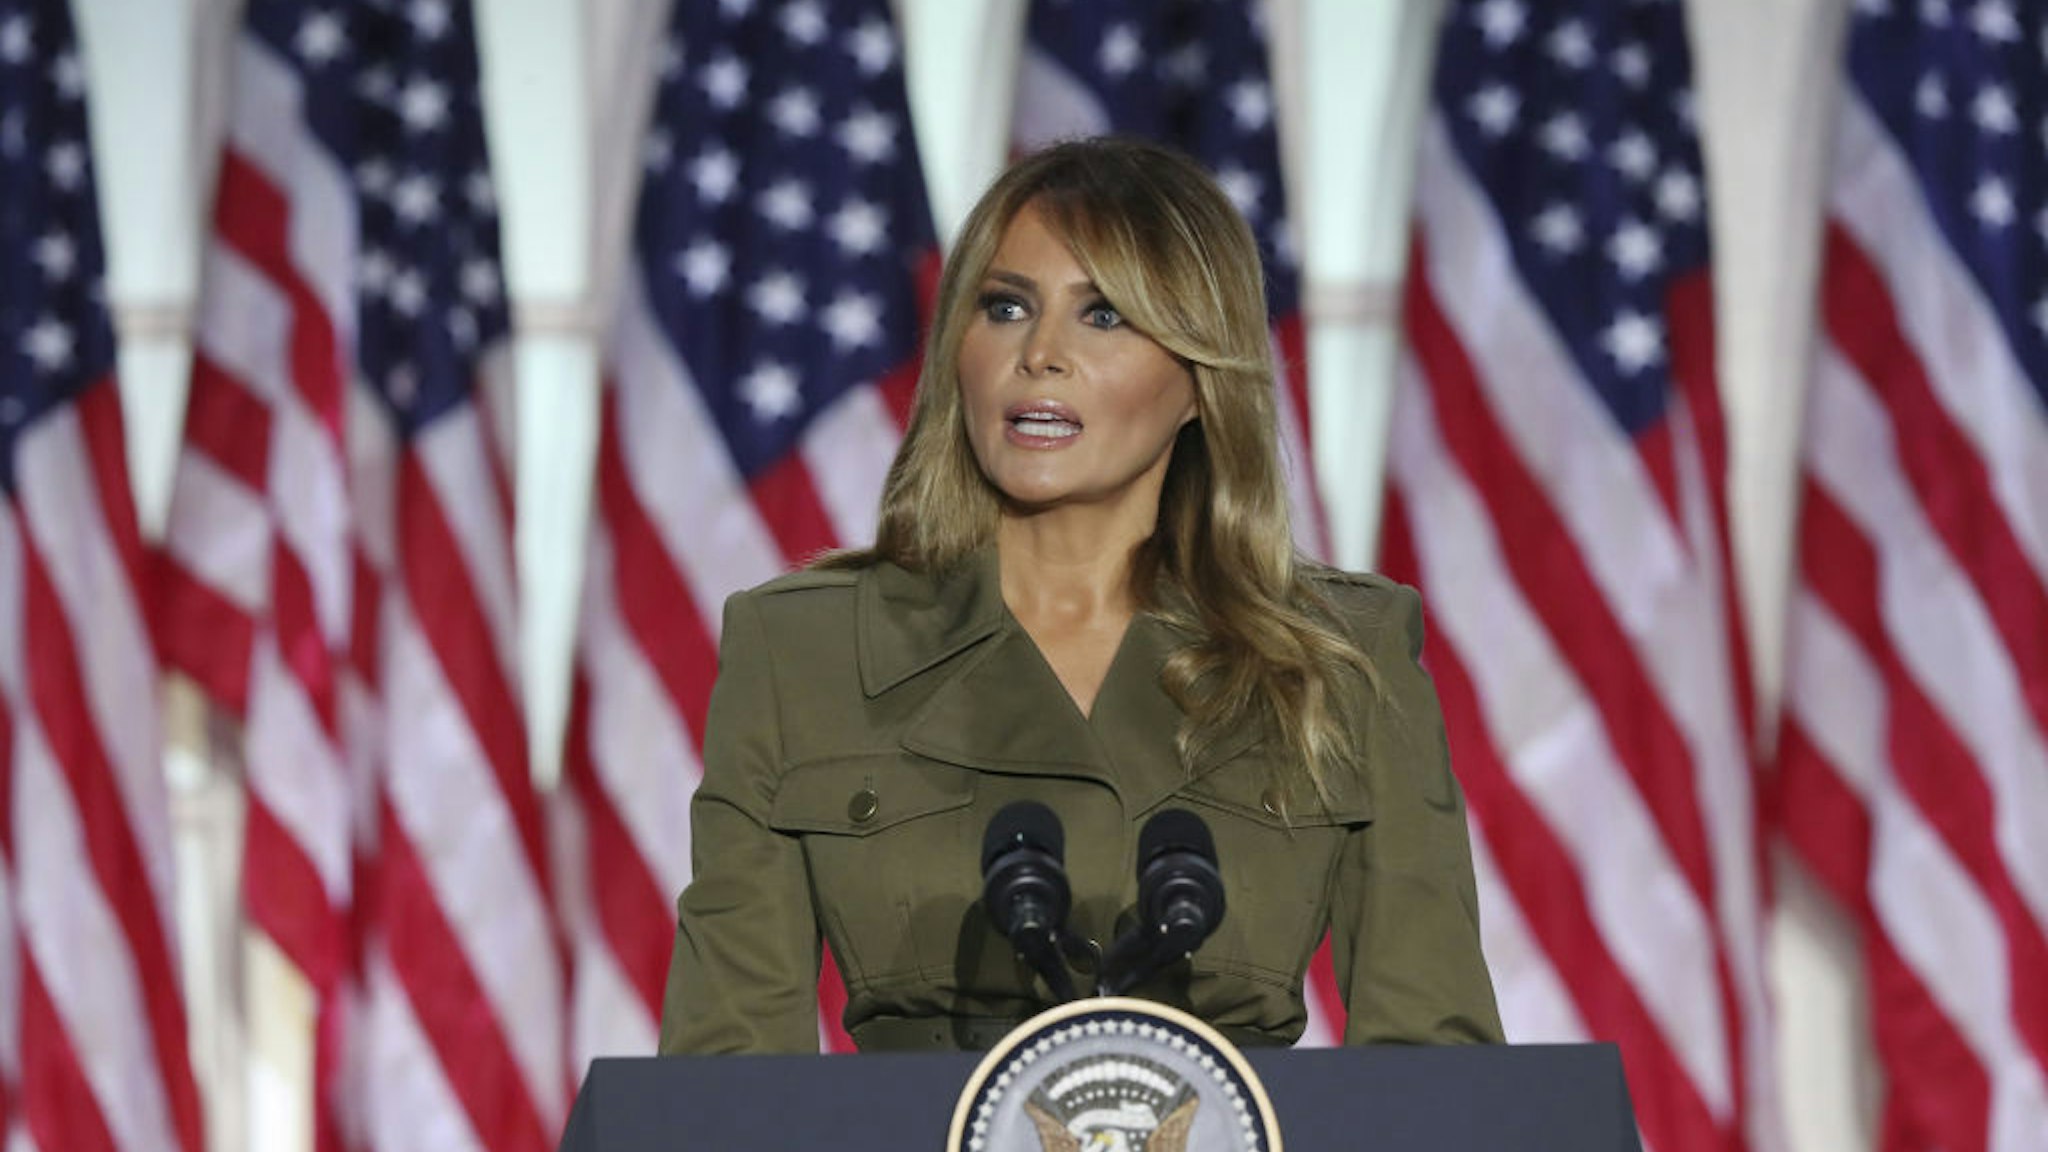 U.S. First Lady Melania Trump speaks during the Republican National Convention in the Rose Garden of the White House in Washington, D.C., U.S., on Tuesday, Aug. 25, 2020.